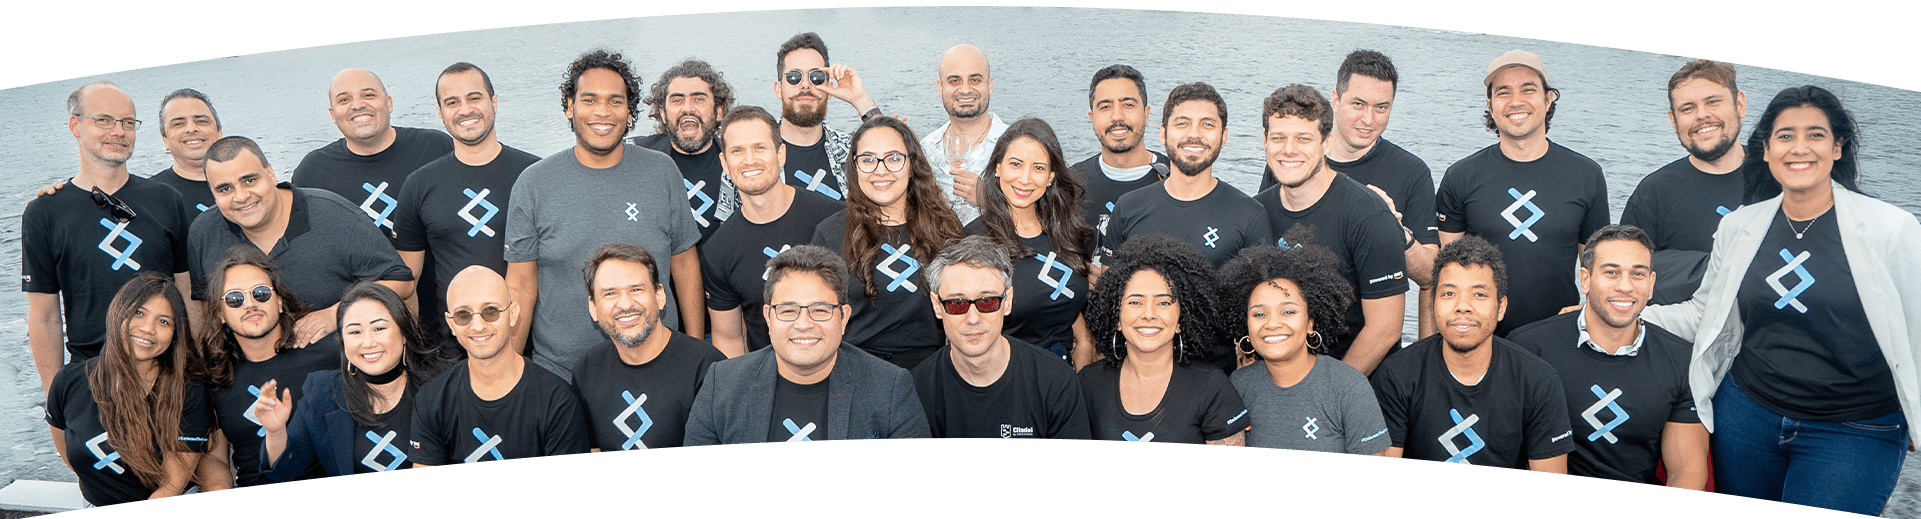 About DNX Solutions Team